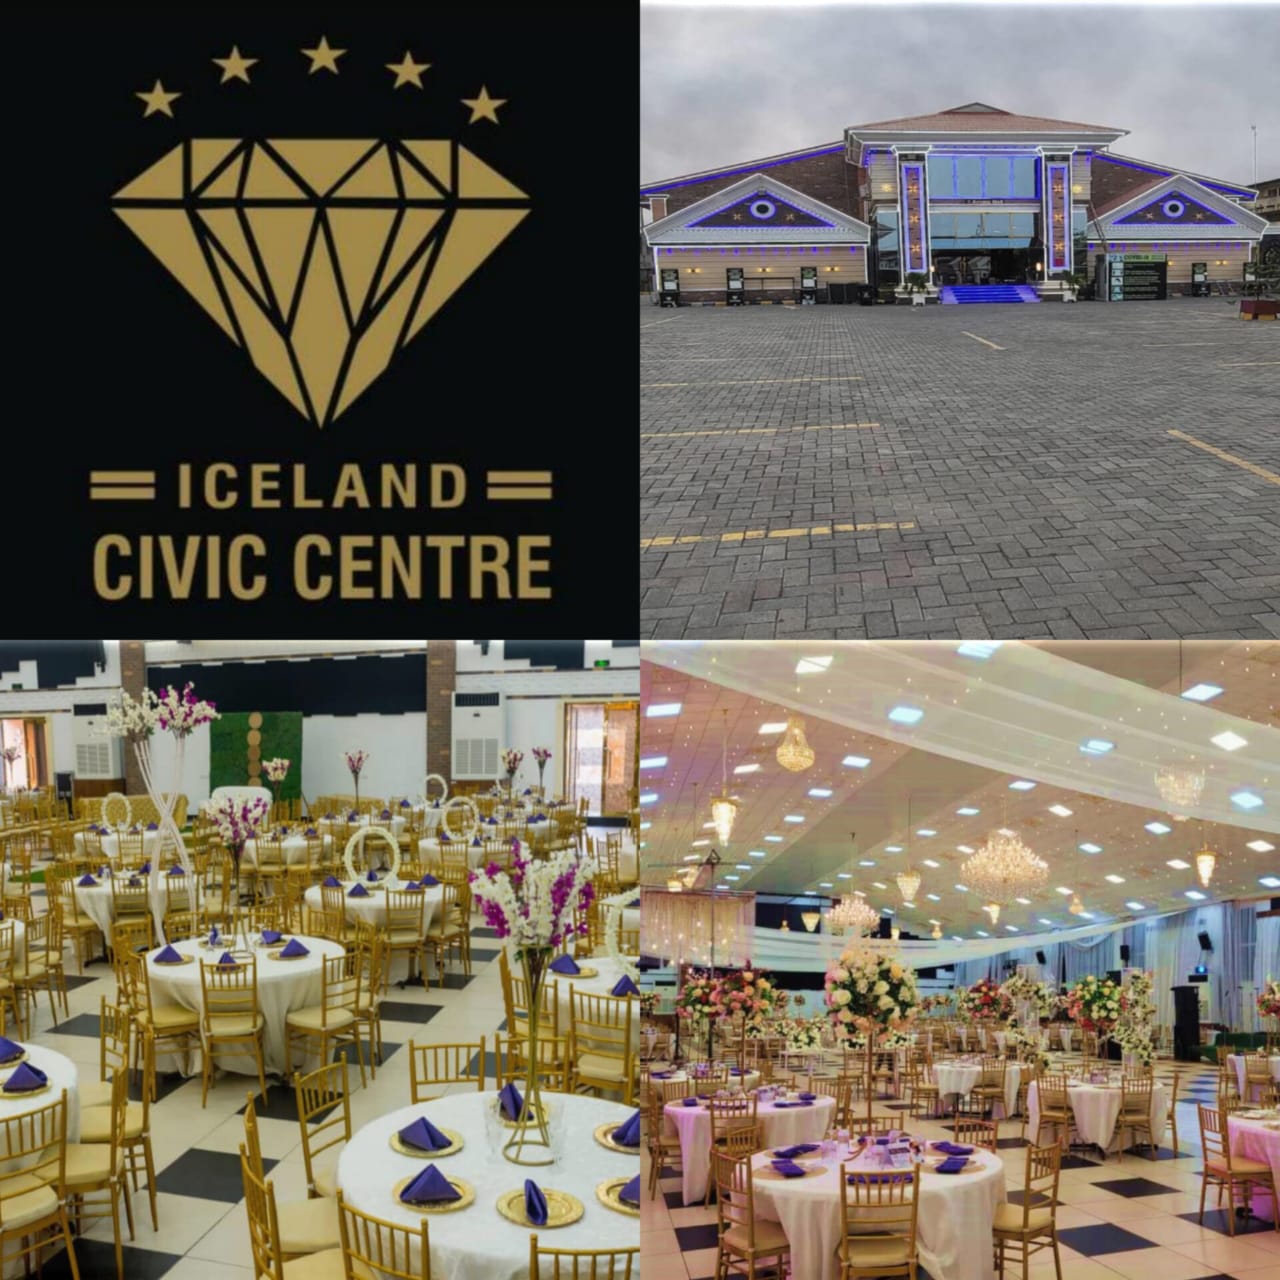 Luxury and Royalty Unite: Iceland Civic Centre Becomes the Hottest Event Place in Lagos Mainland